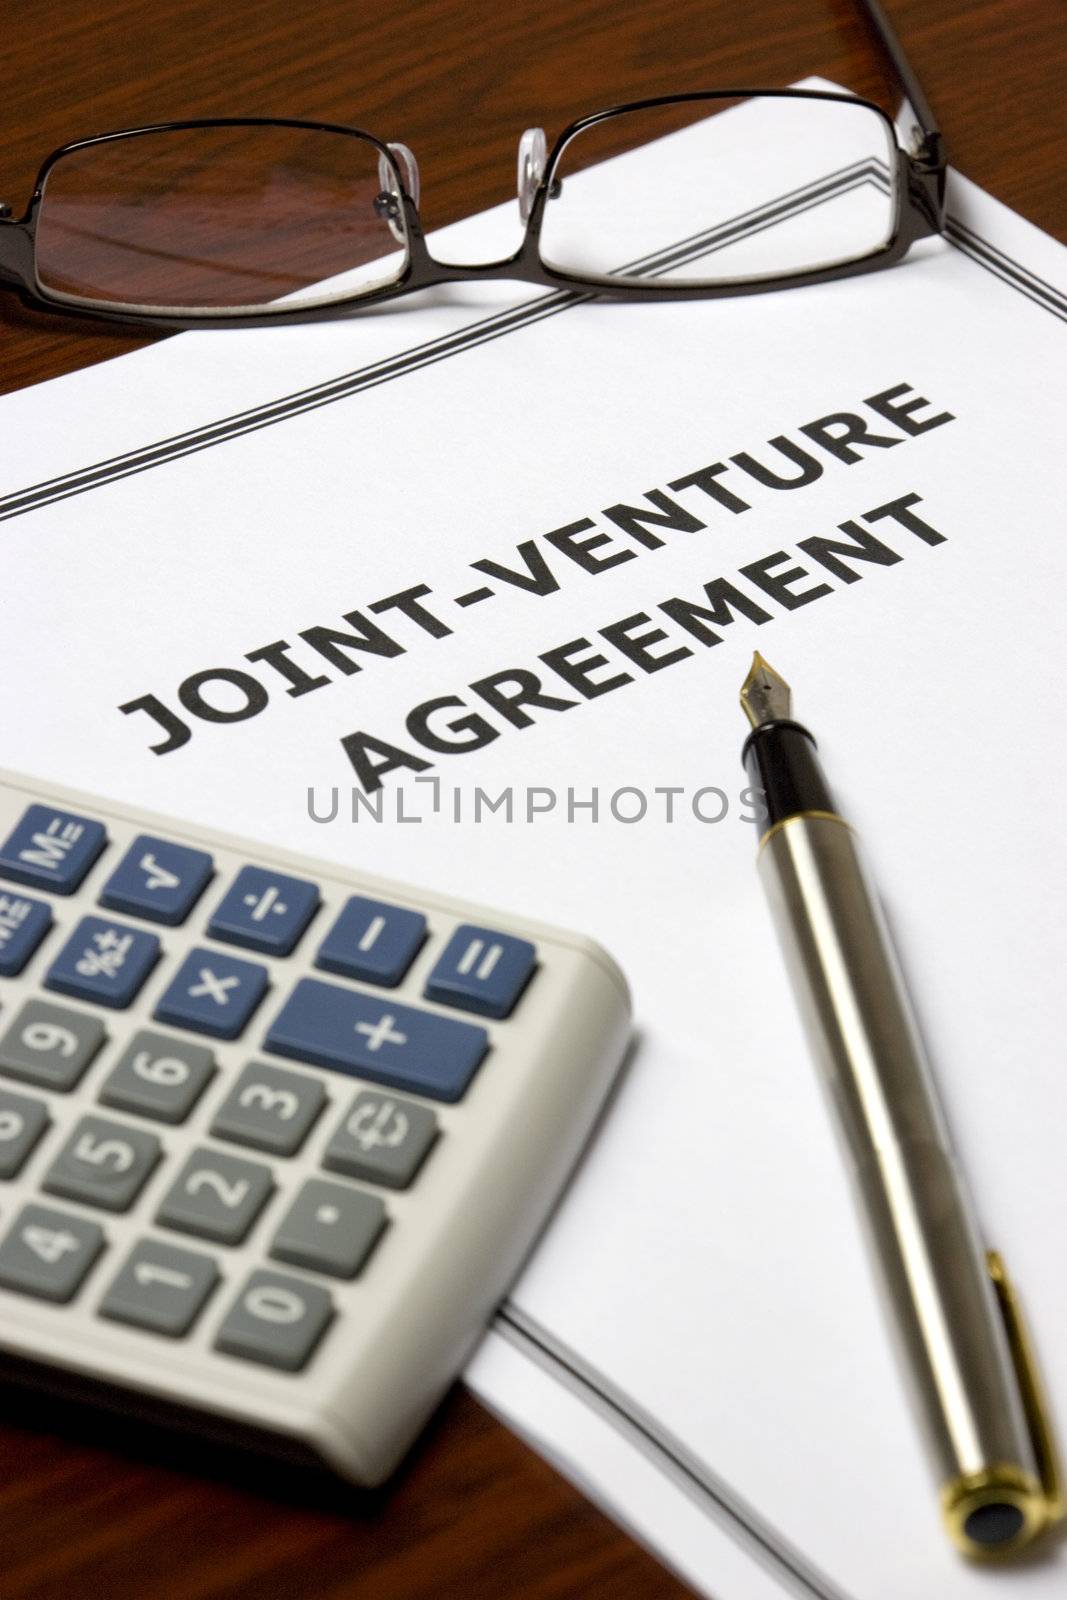 Image of a joint-venture agreement on an office table.